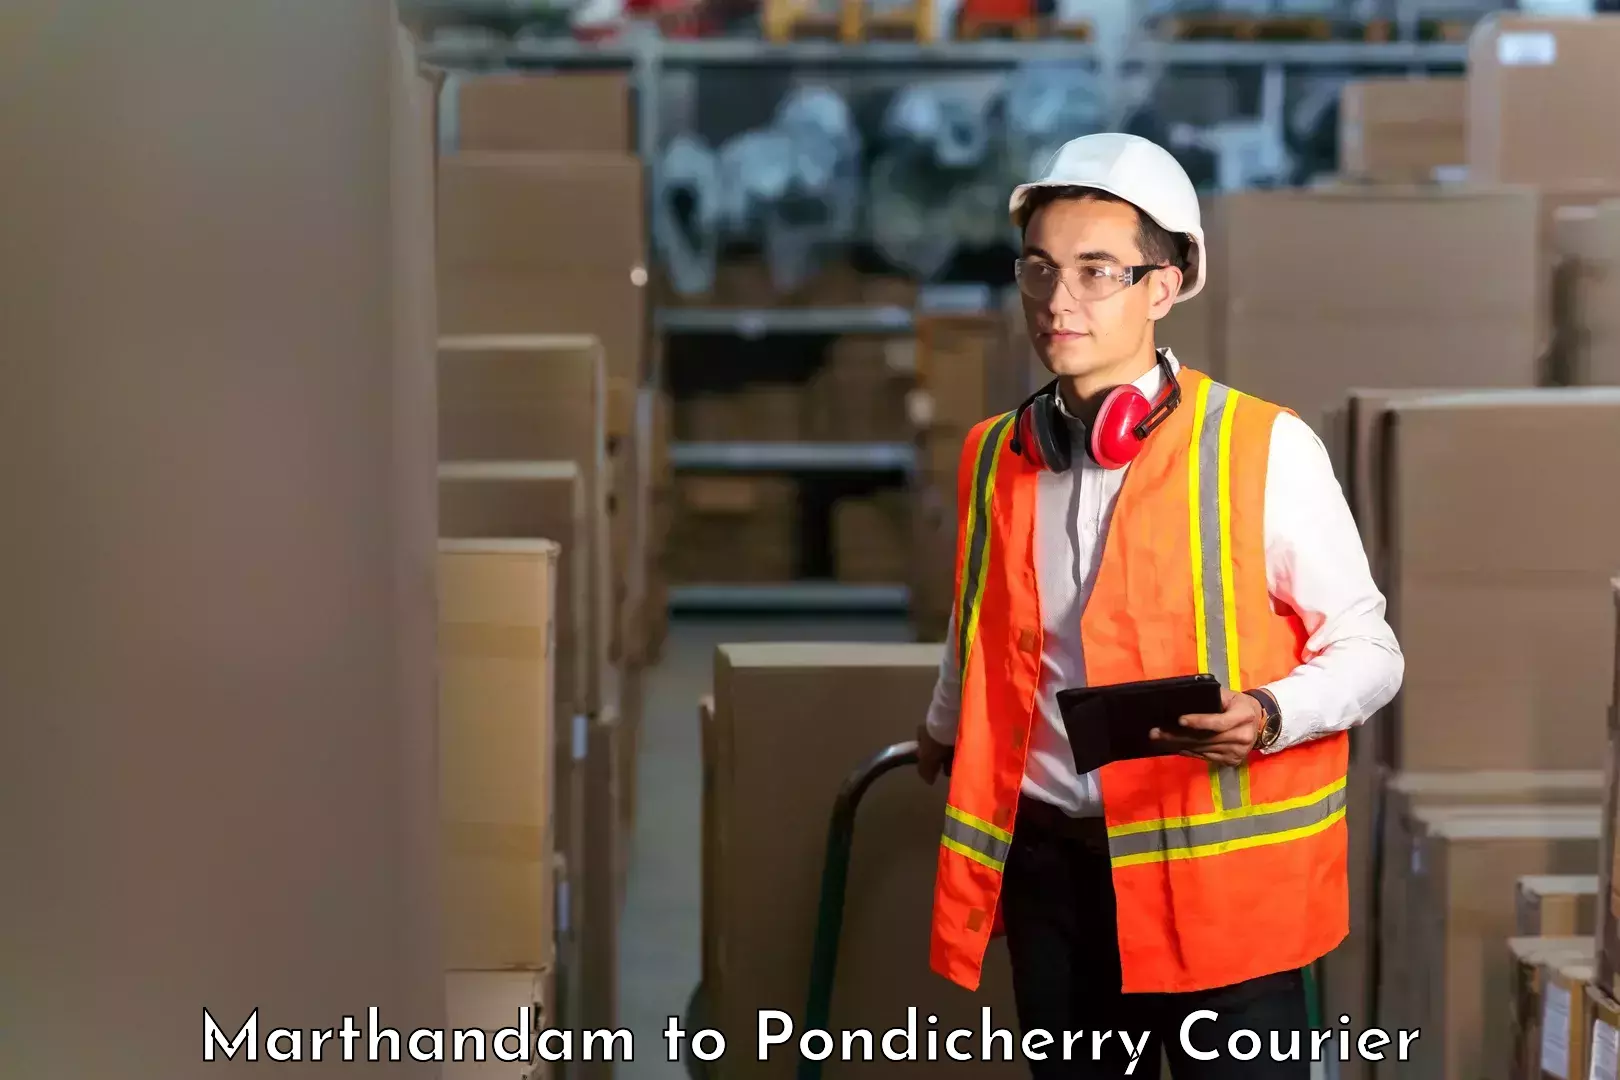 Quality courier partnerships in Marthandam to Pondicherry